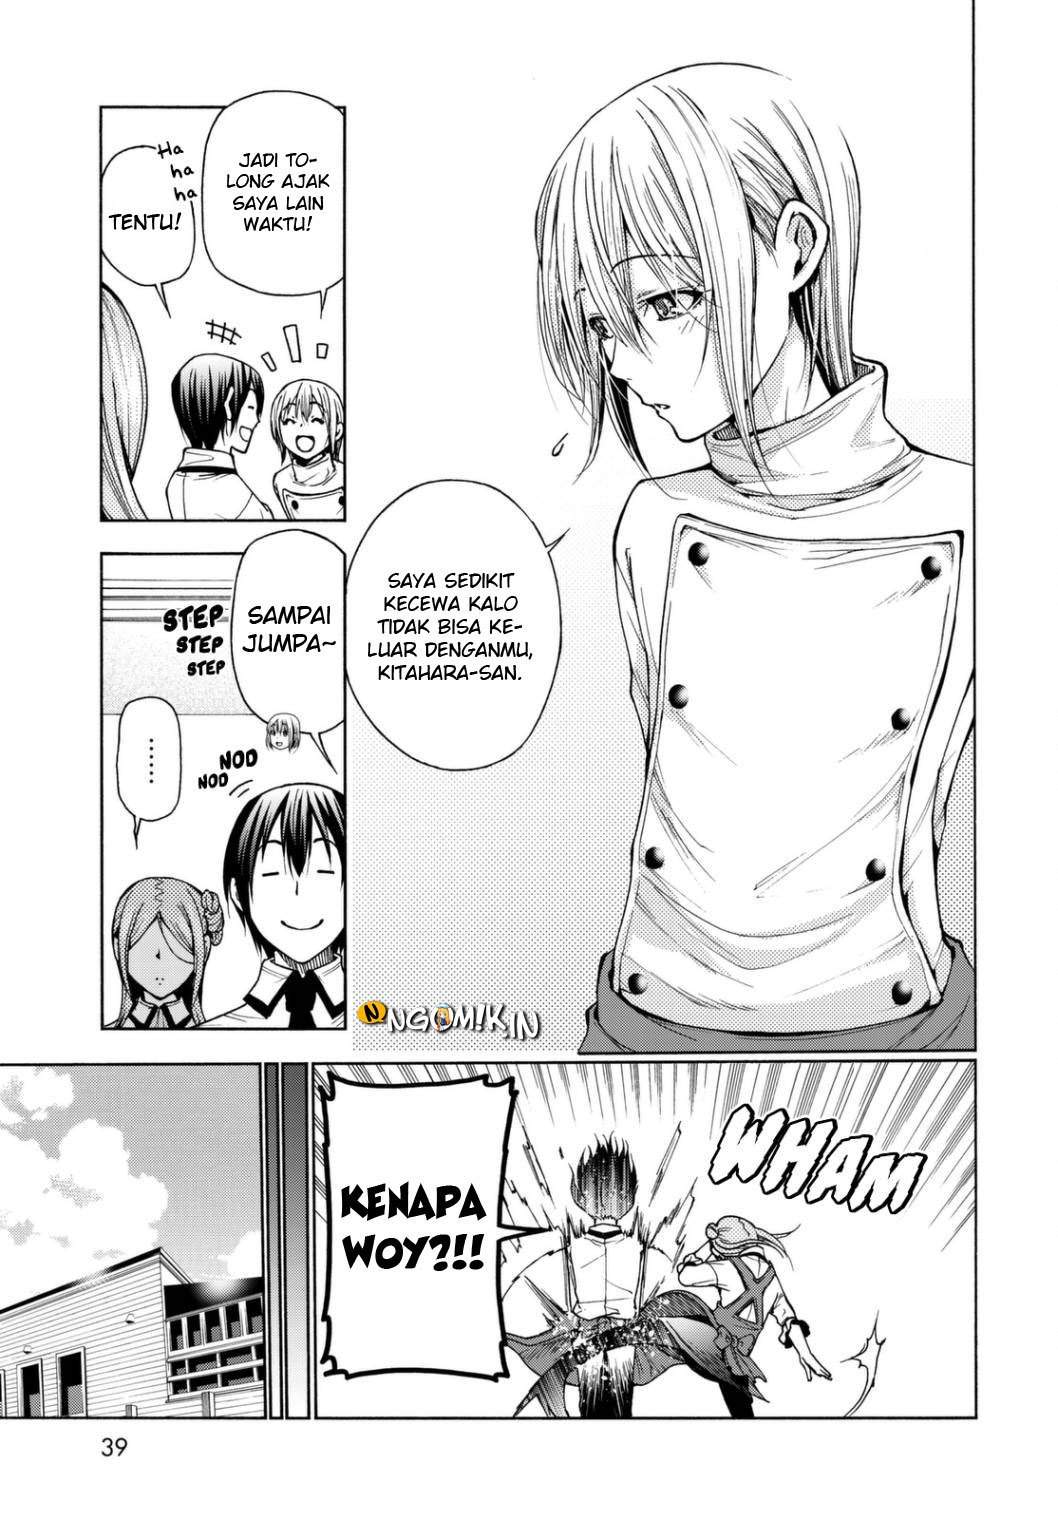 Grand Blue Chapter 37 Bahasa Indonesia